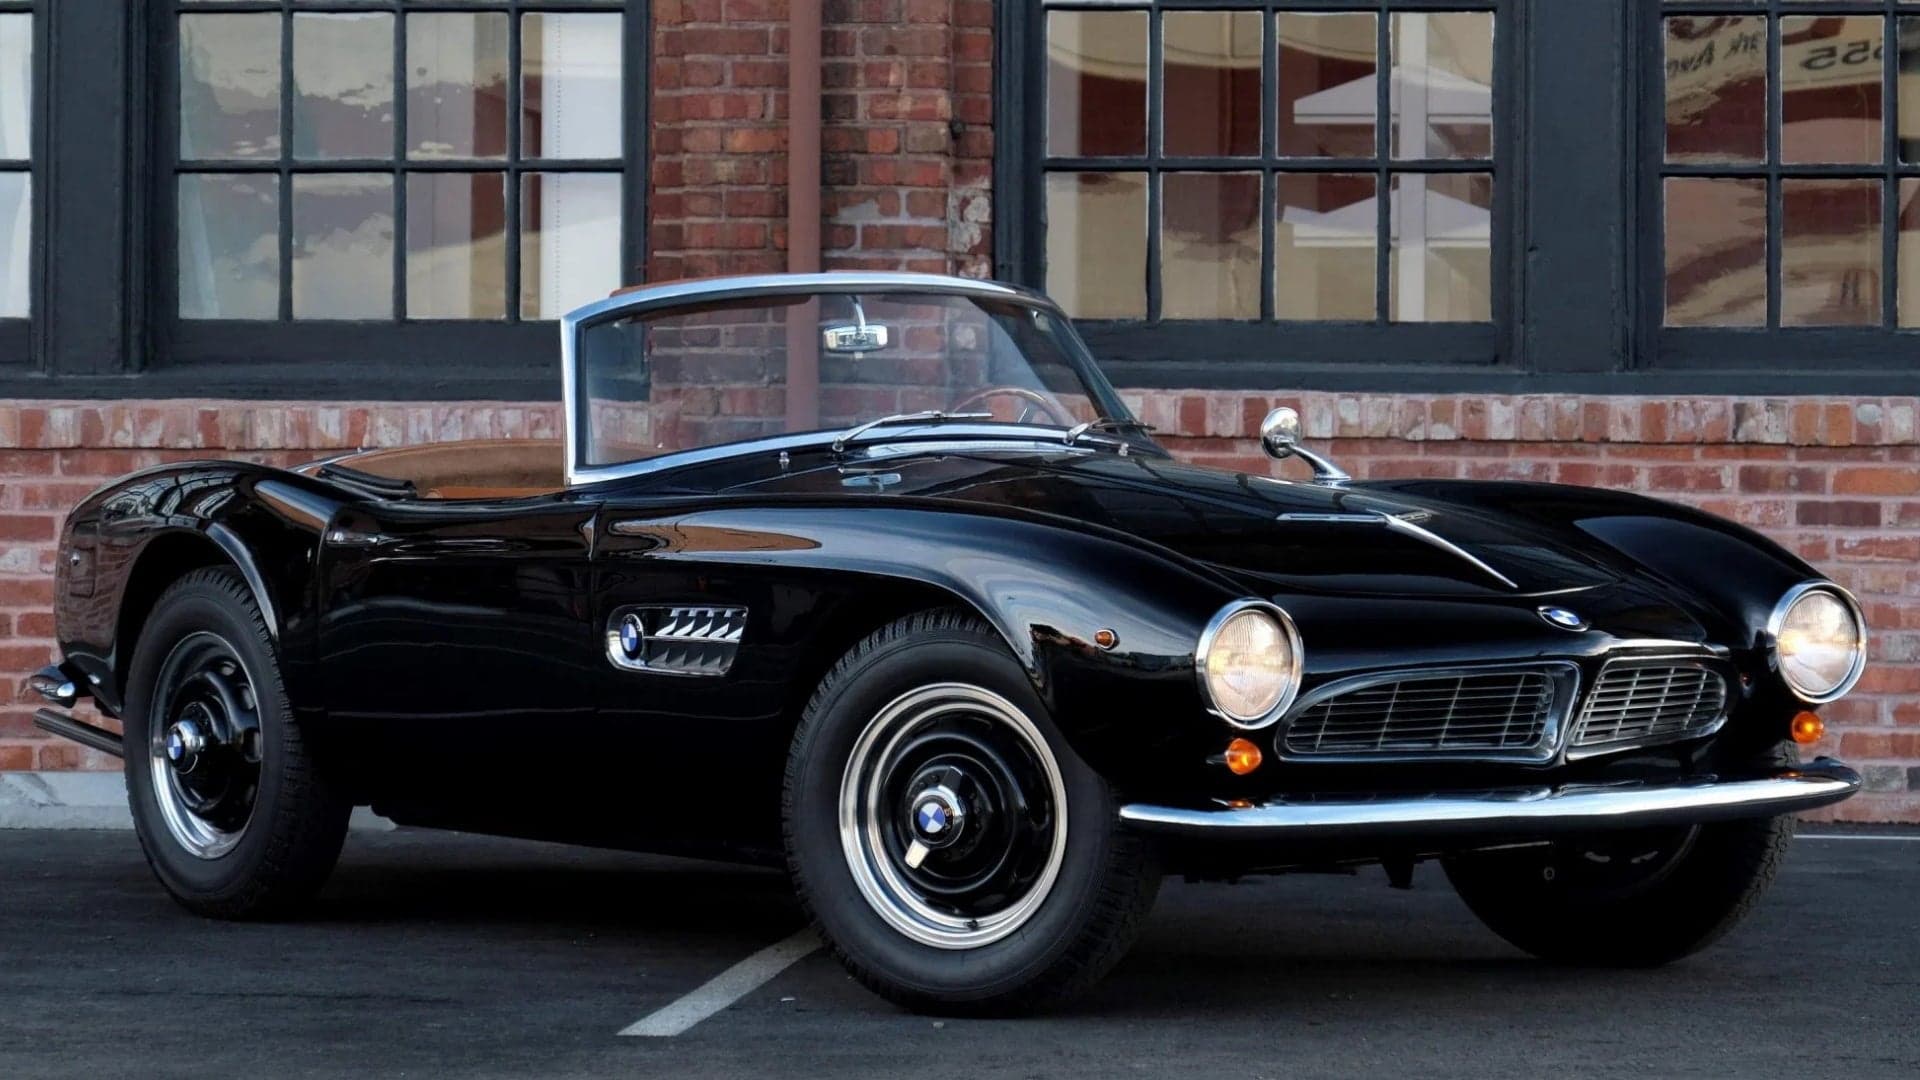 Already at $1.6M, This 1957 BMW 507 Will Become the Most Expensive Car Ever on Bring a Trailer